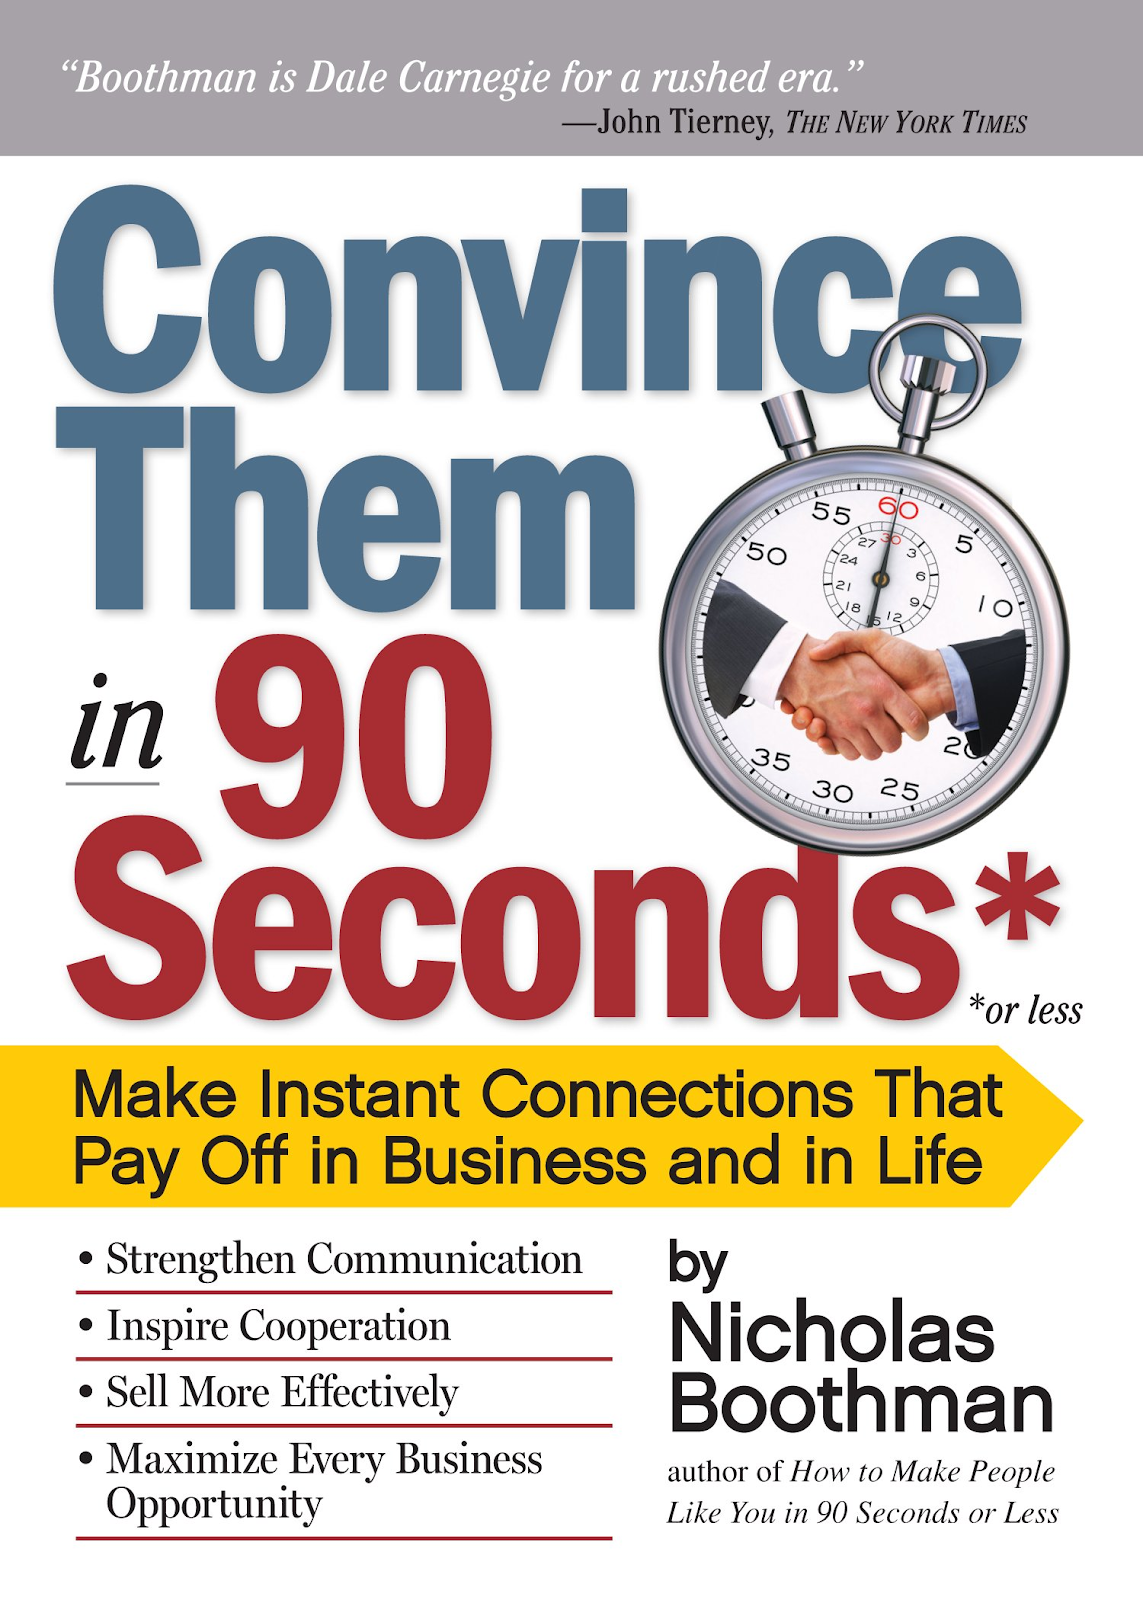 Book 'Convince Them in 90 Seconds or Less'